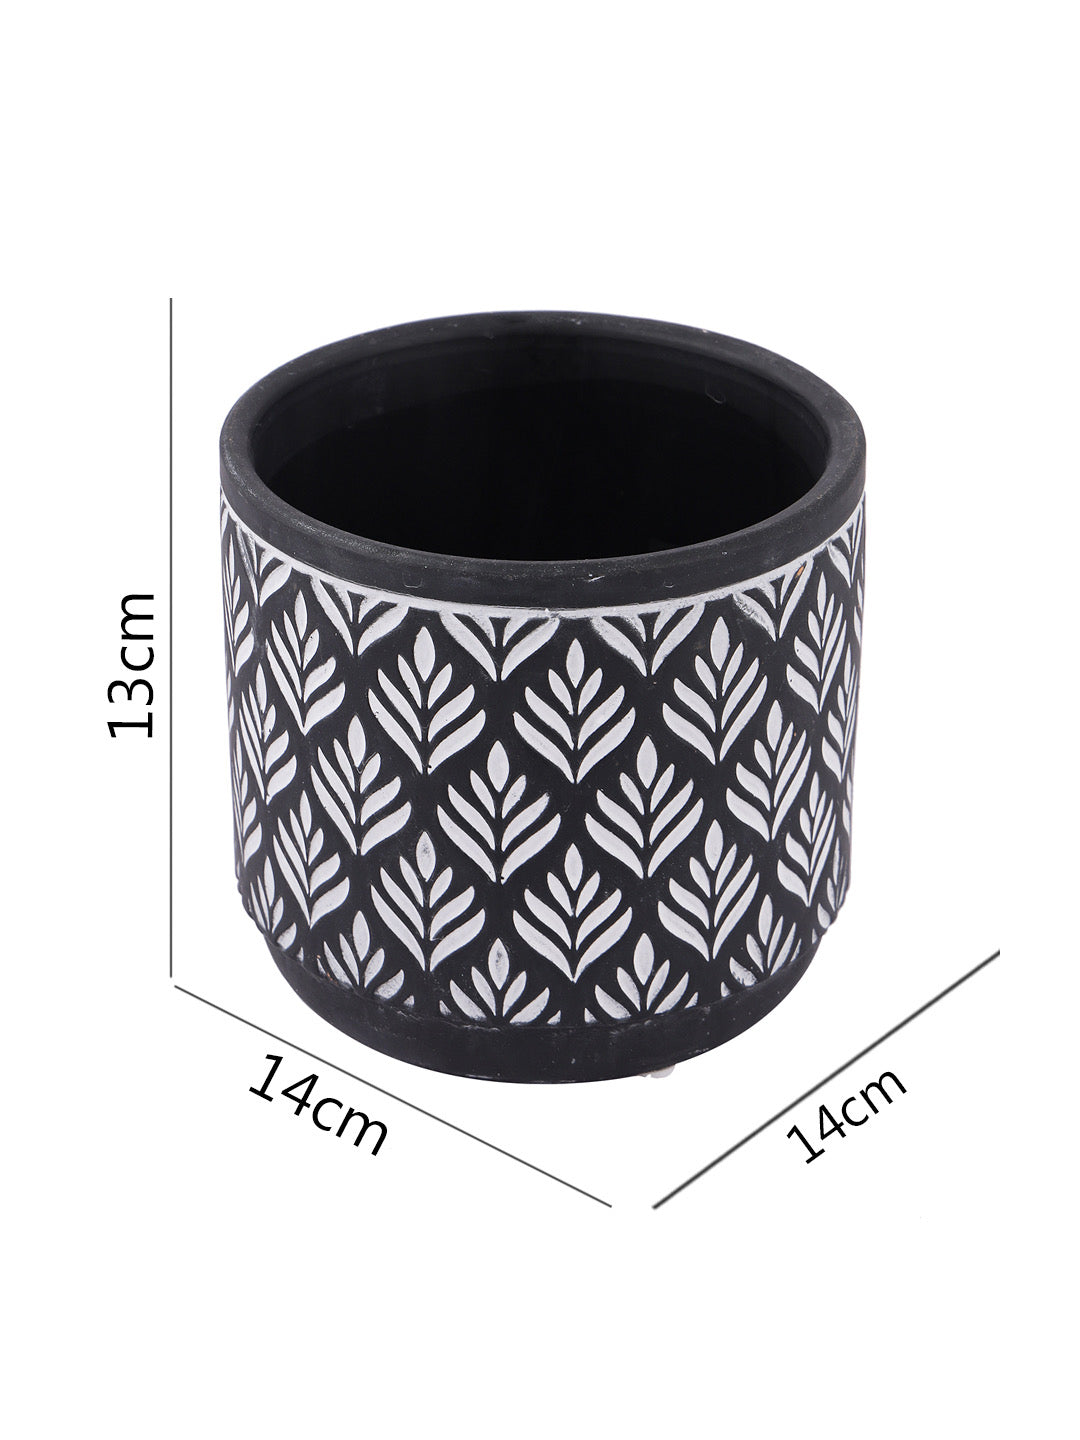 Classy and Chic Black Hue Planter - Default Title (CH210059)